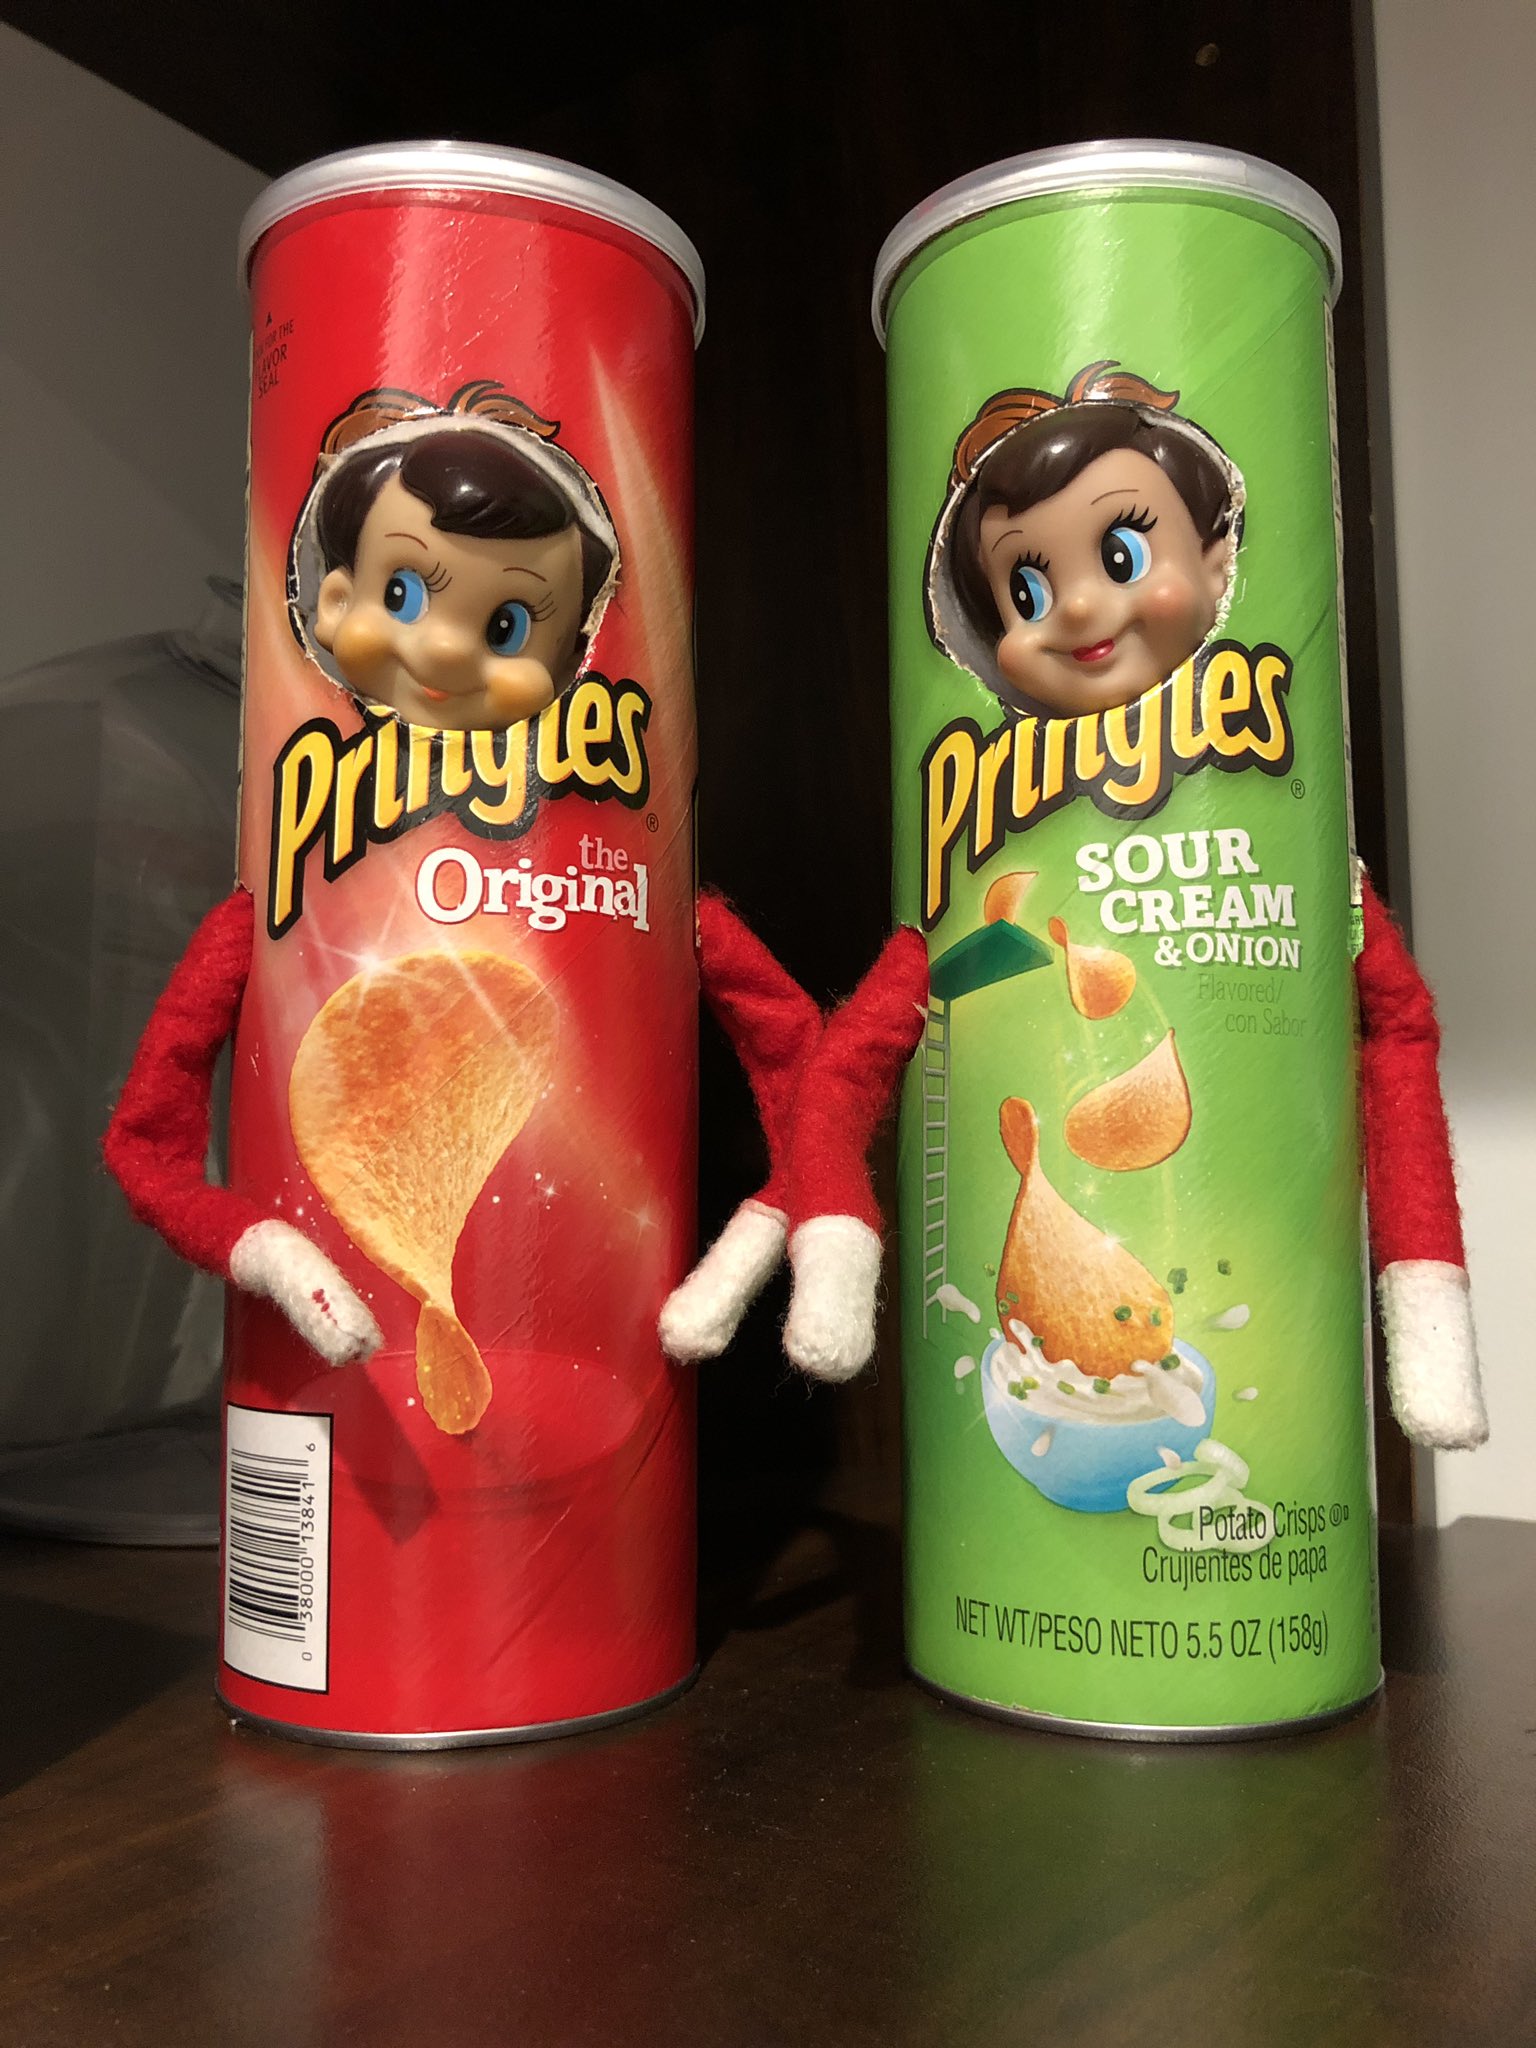 visit blush hypocrisy Ian Poulter on Twitter: "“Found them” this morning elves were found in tubes  of @Pringles 😂😂😂 @elfontheshelf always up to their normal tricks...  morning fun with the kids.. 👍🏻🎄❄️☃️ https://t.co/mSJAqIgXQc" / Twitter